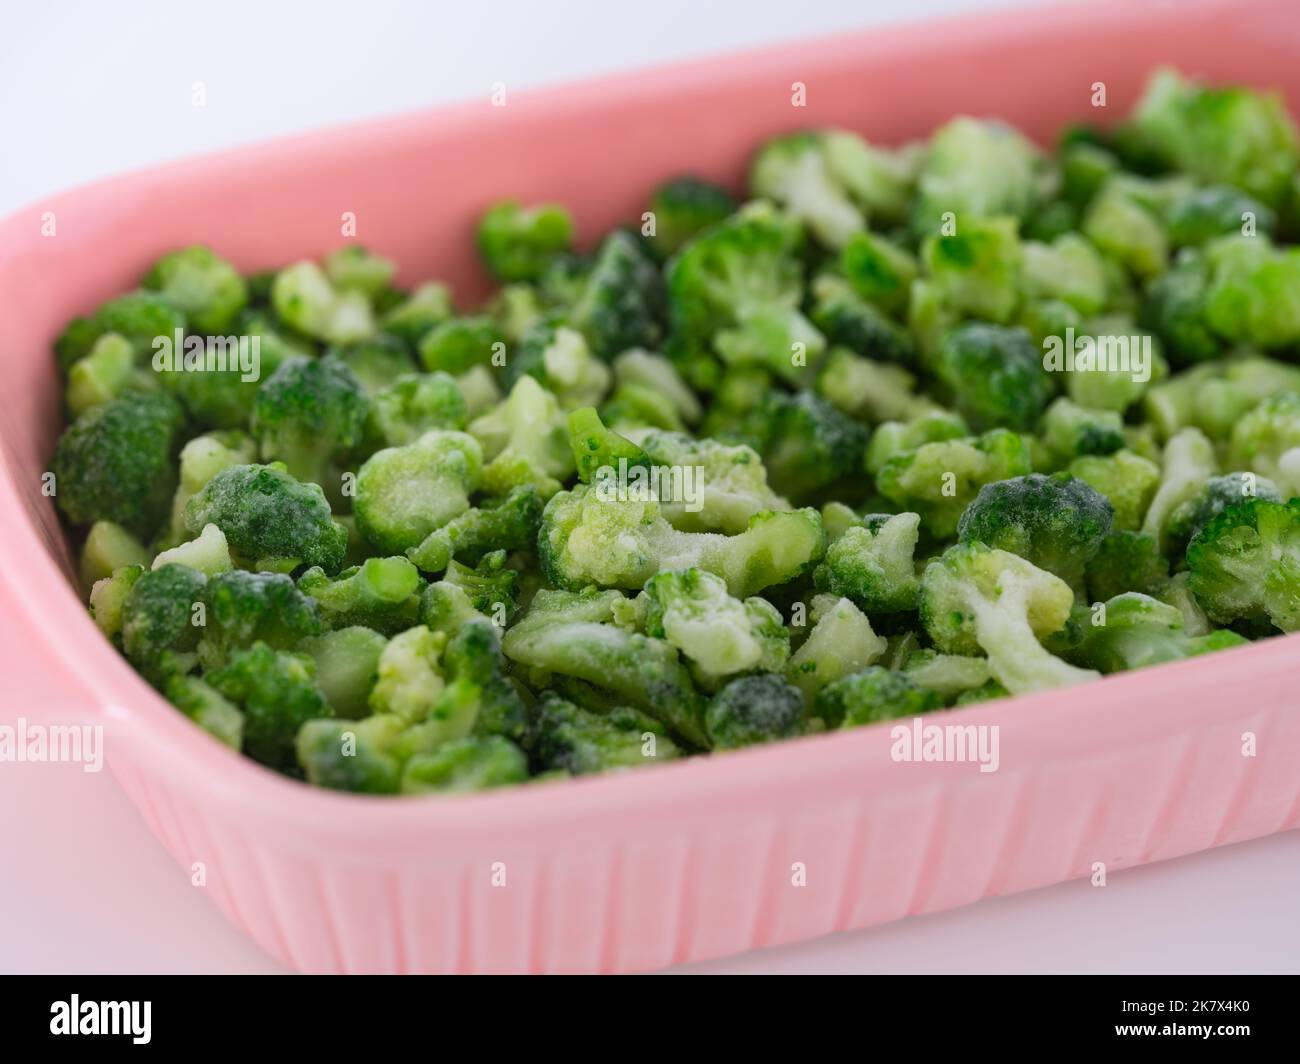 Frozen mini broccoli in a pink baking tray. Close up. Stock Photo